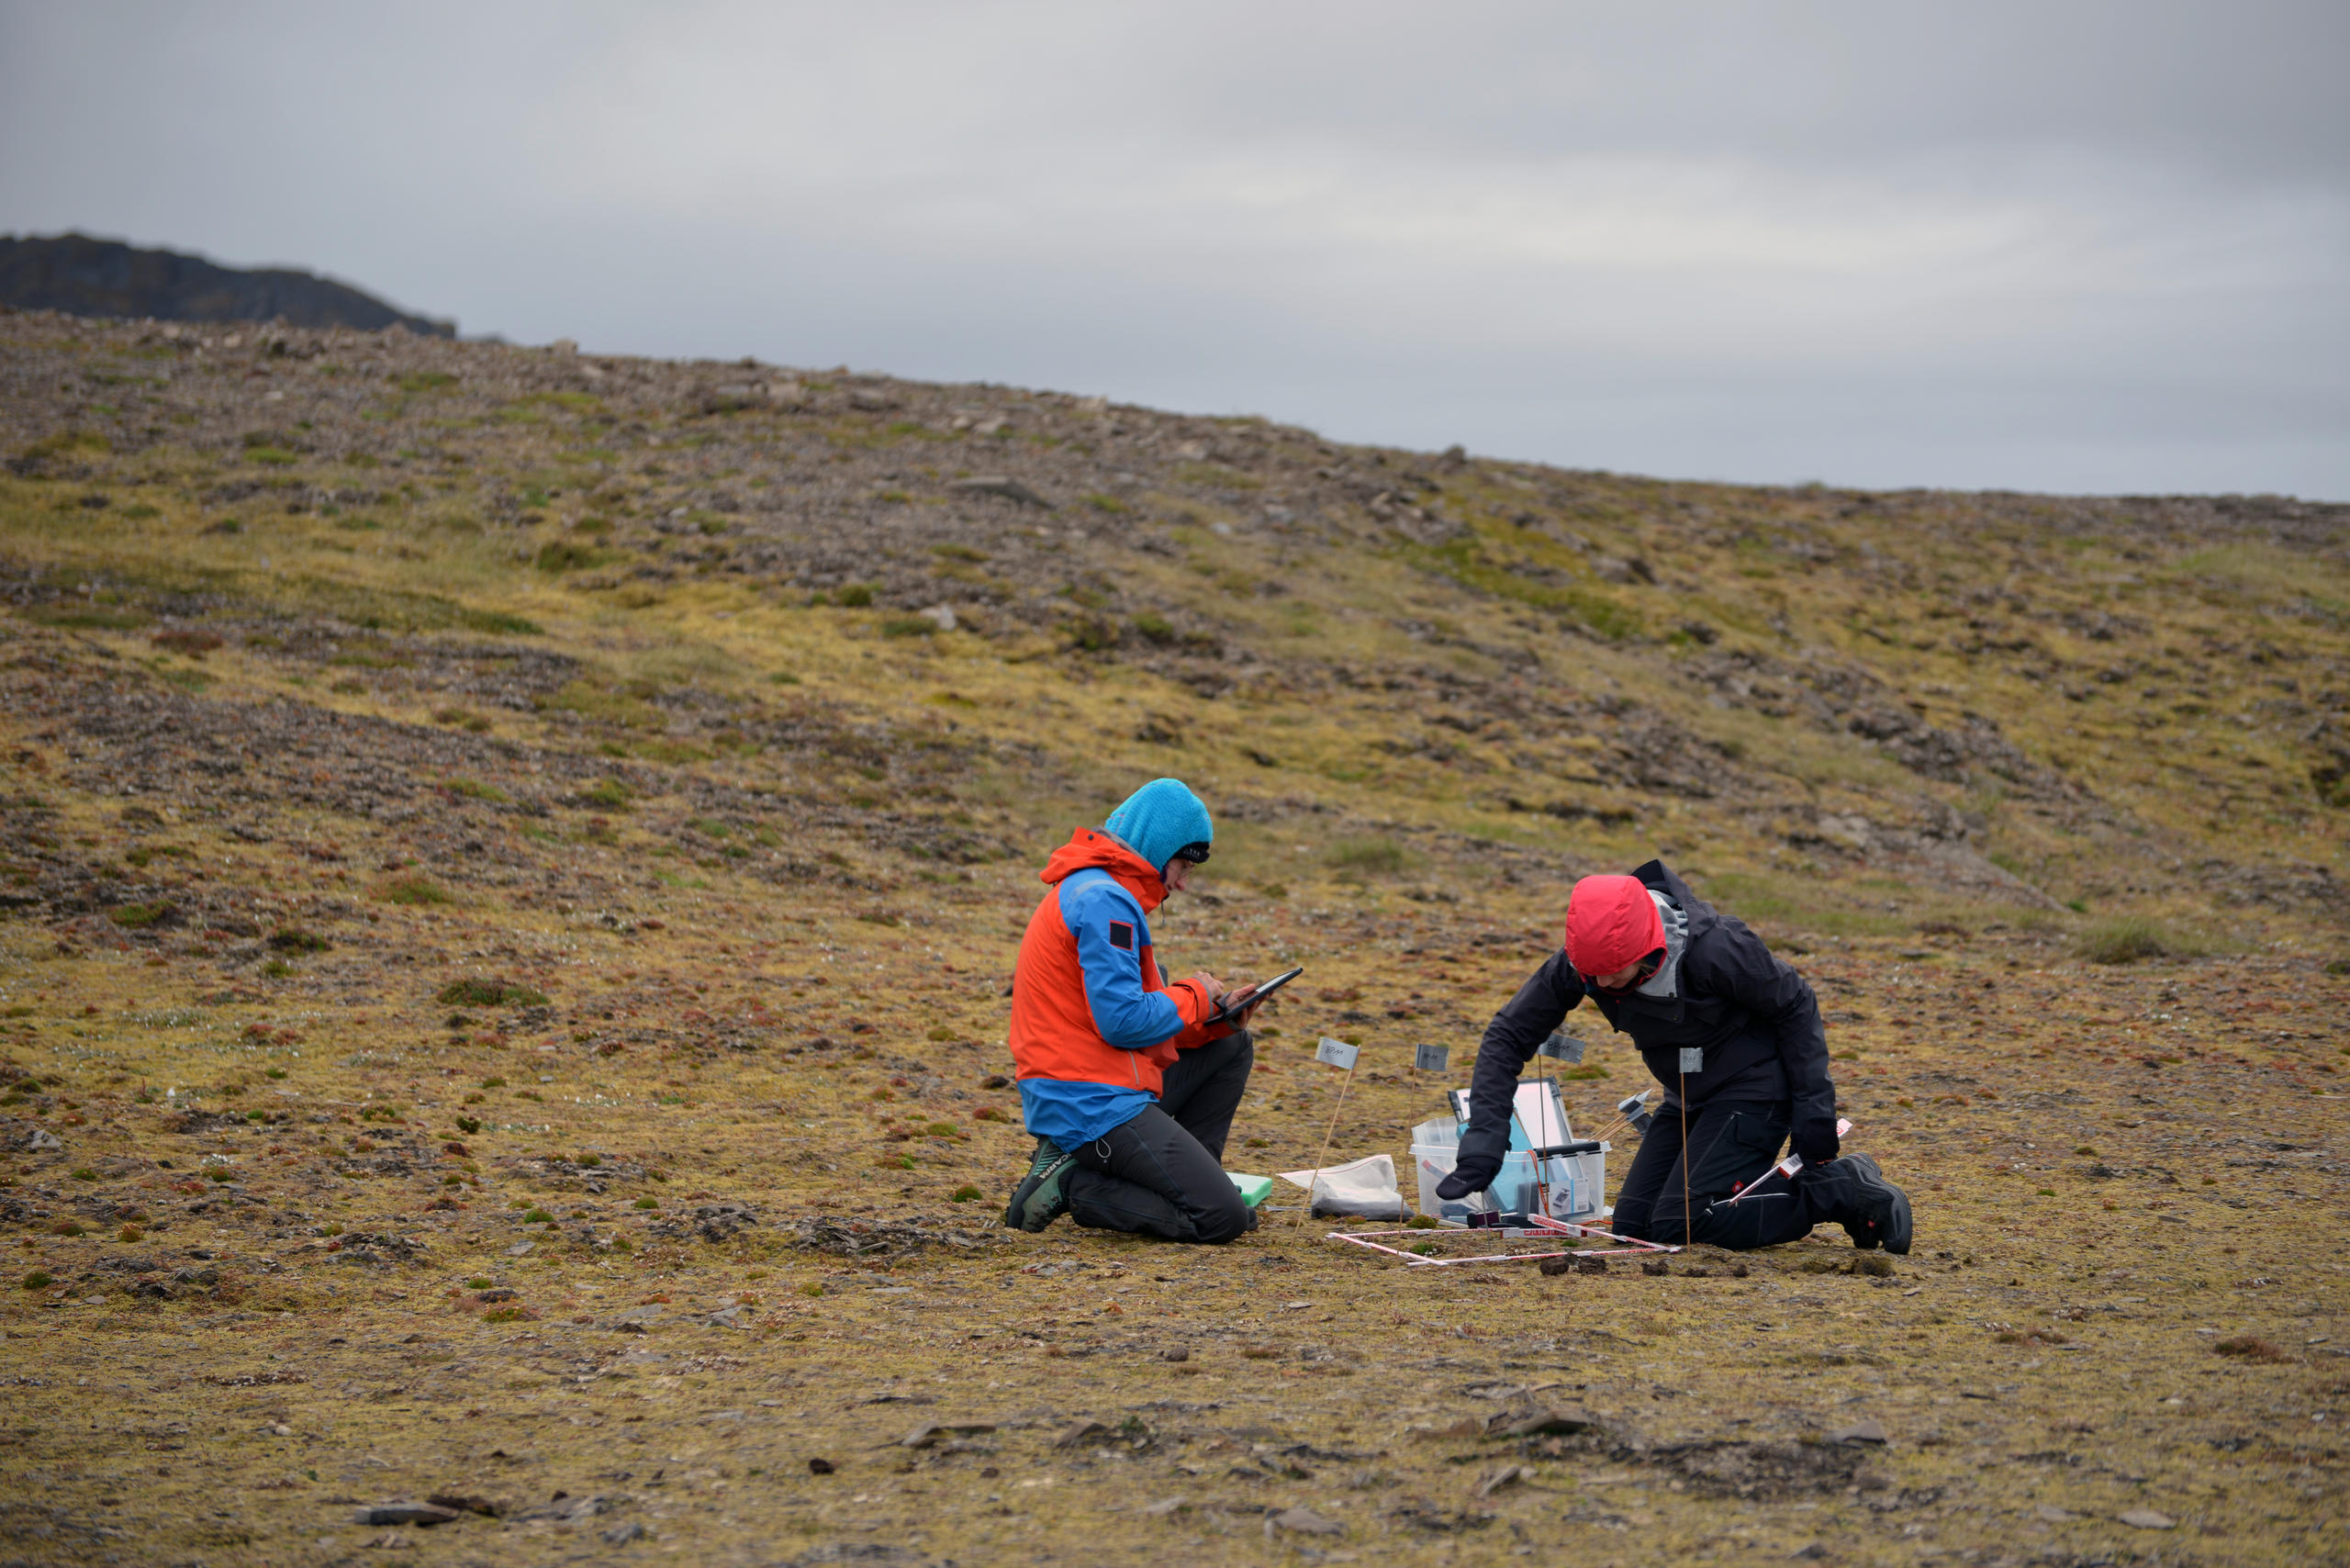 Jamila and Jana recording basic environmental data like substrate depth and soil moisture on a typical tundra site.